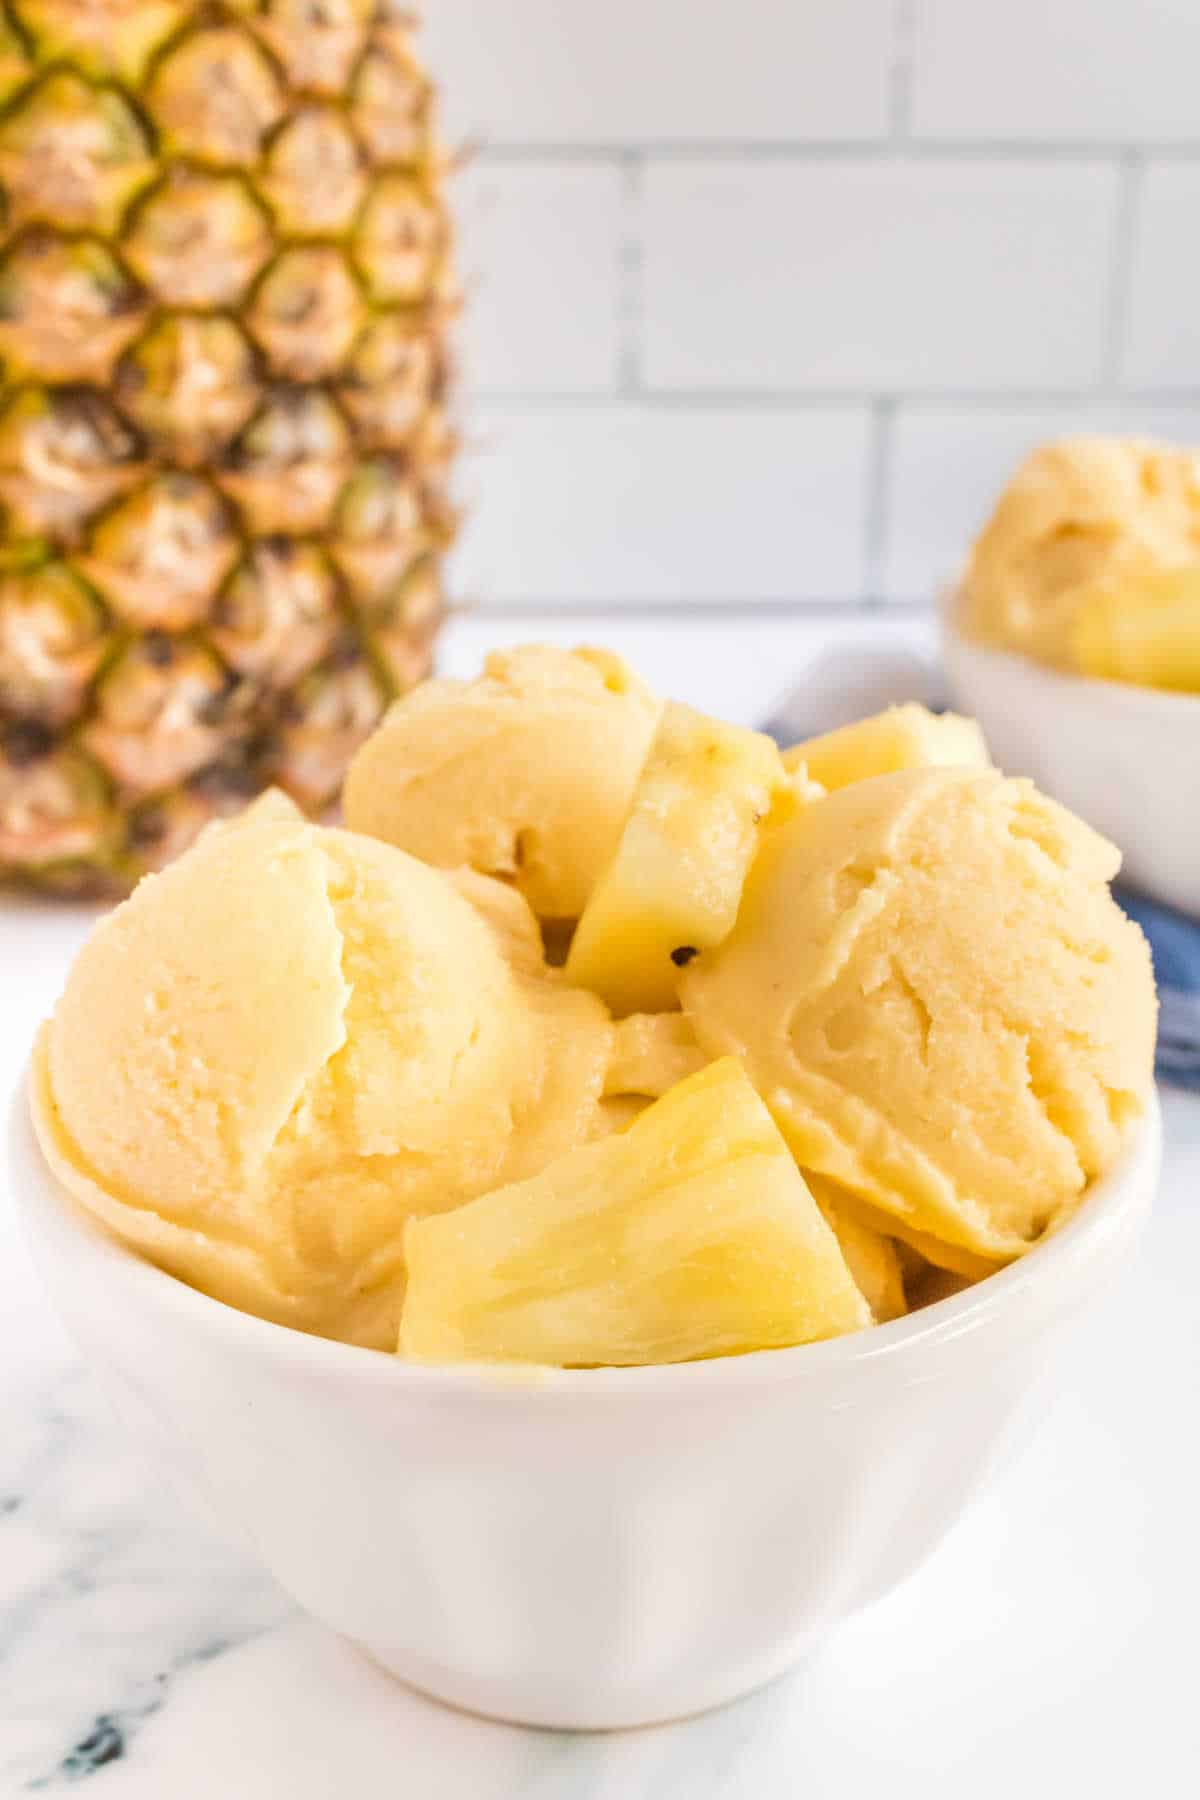 Pineapple ice cream in a bowl.